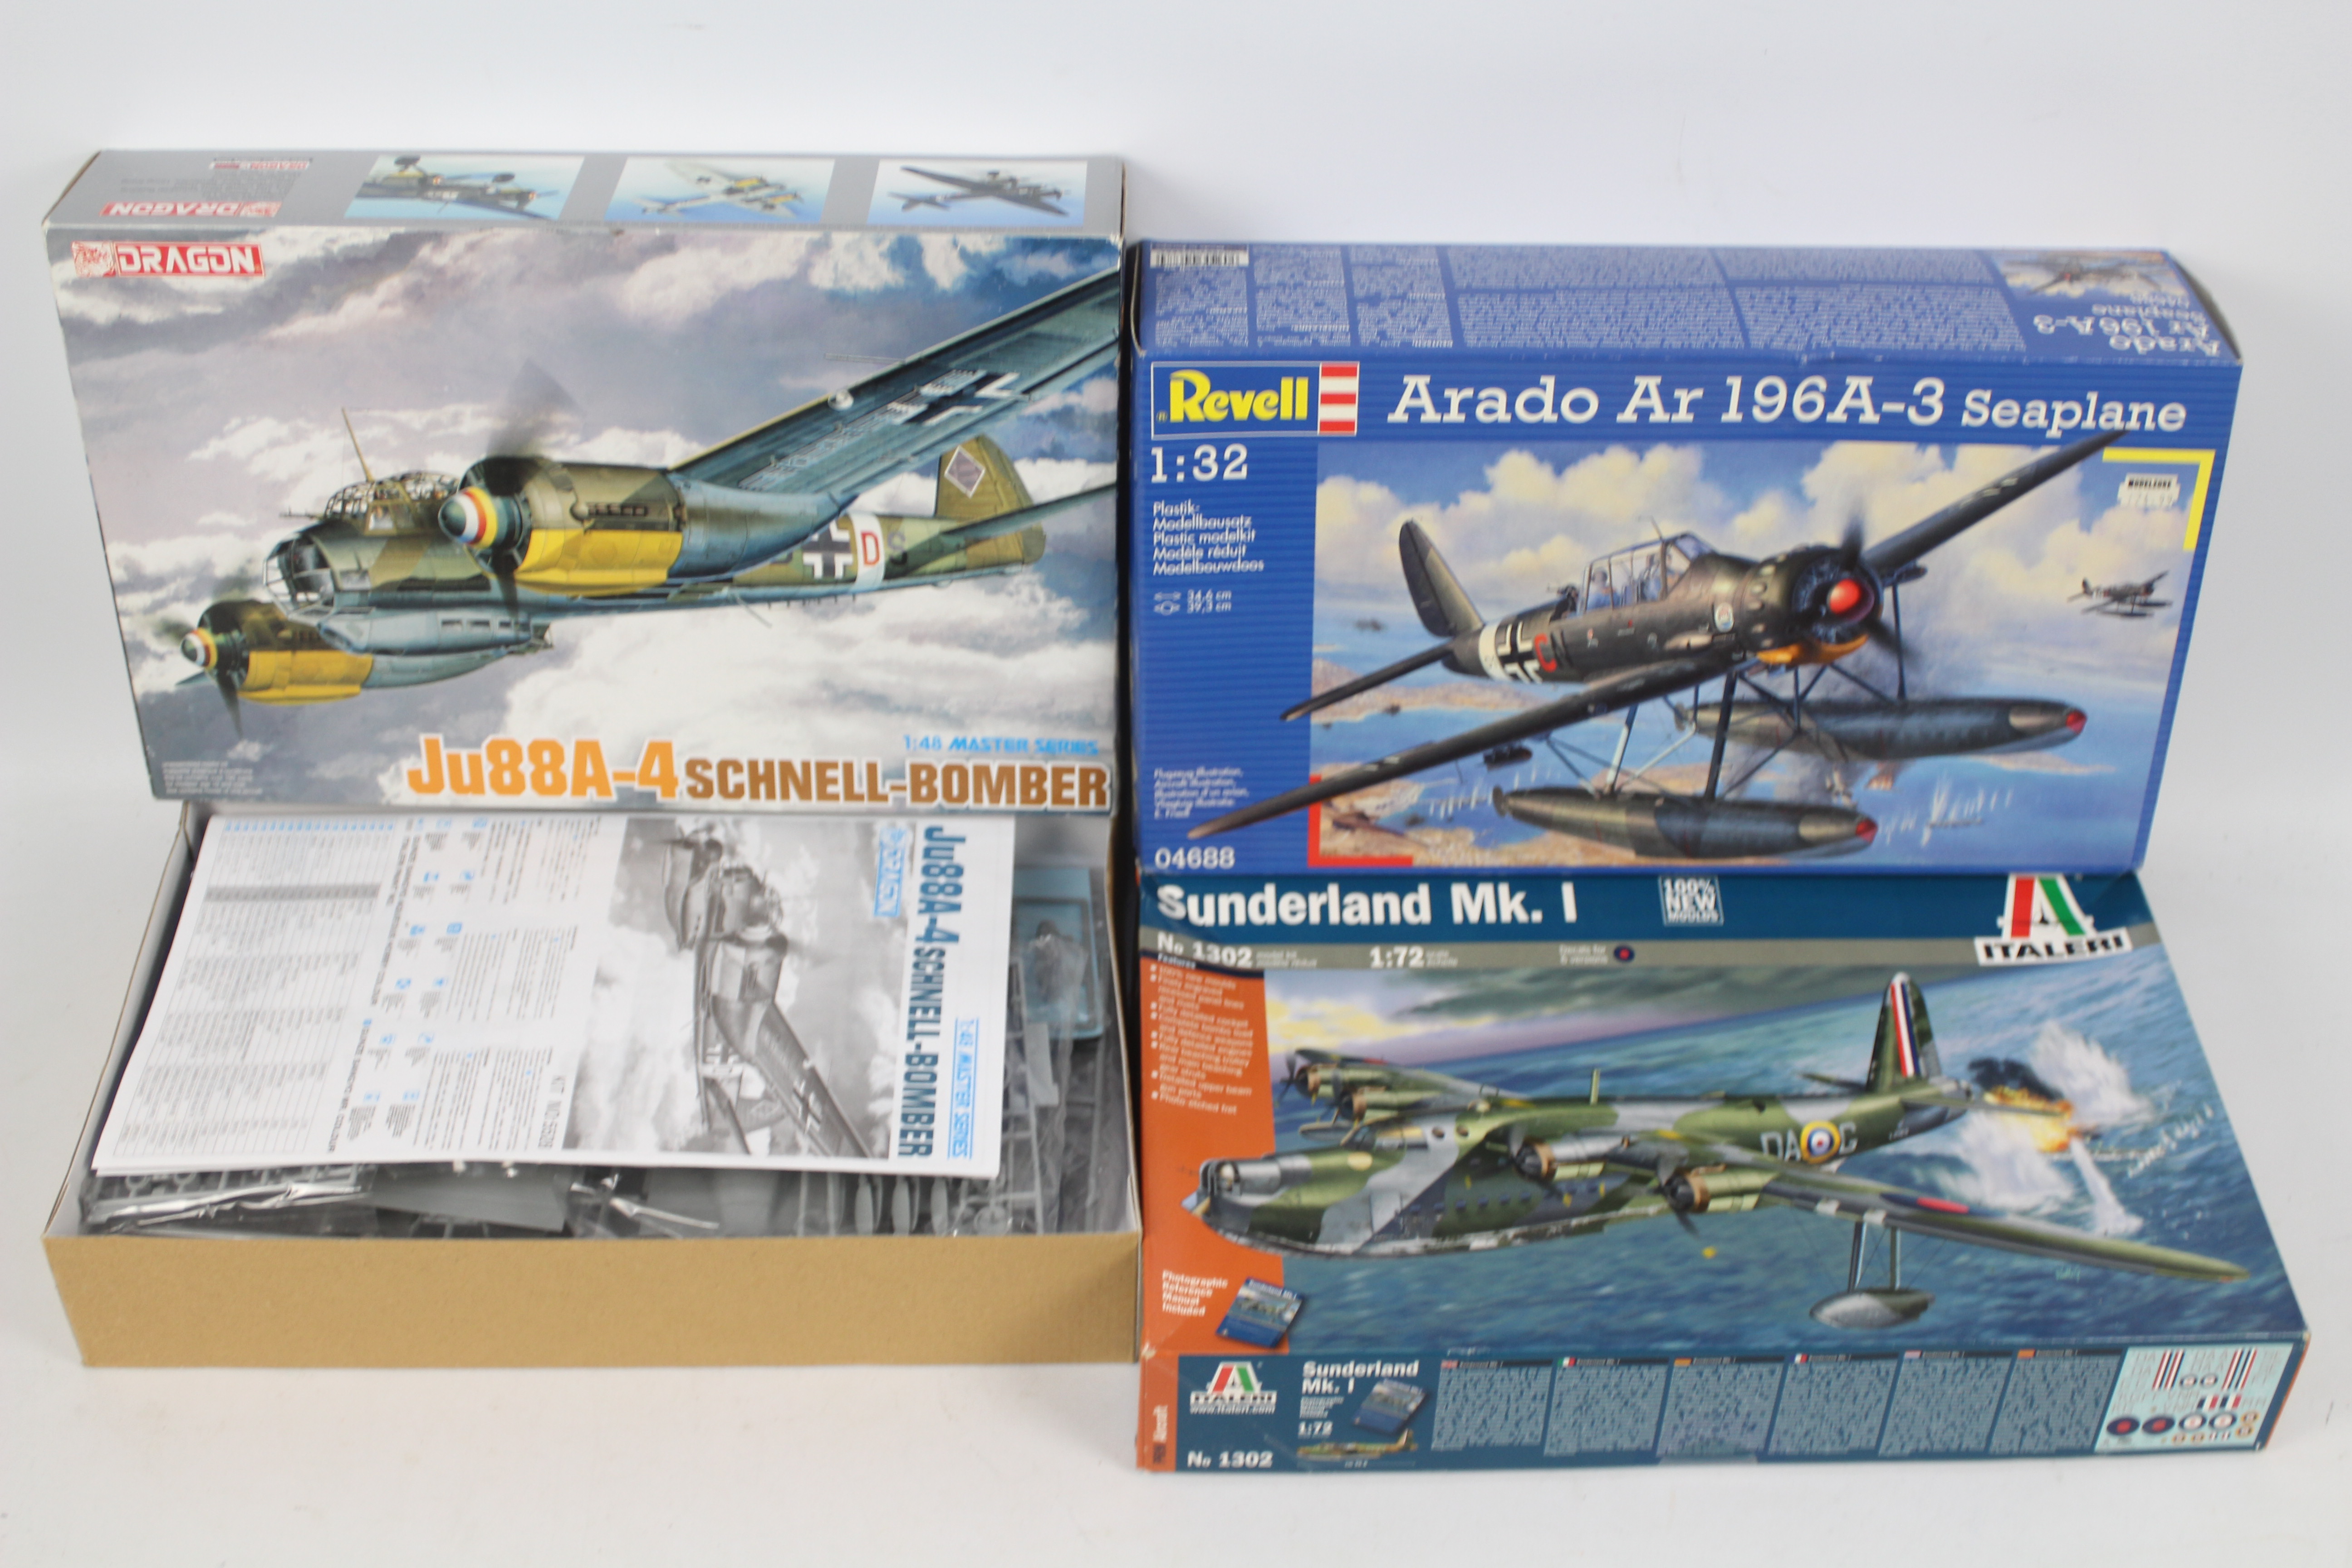 Italeri - Revell - Dragon - Three boxed military aircraft plastic model kits in various scales.